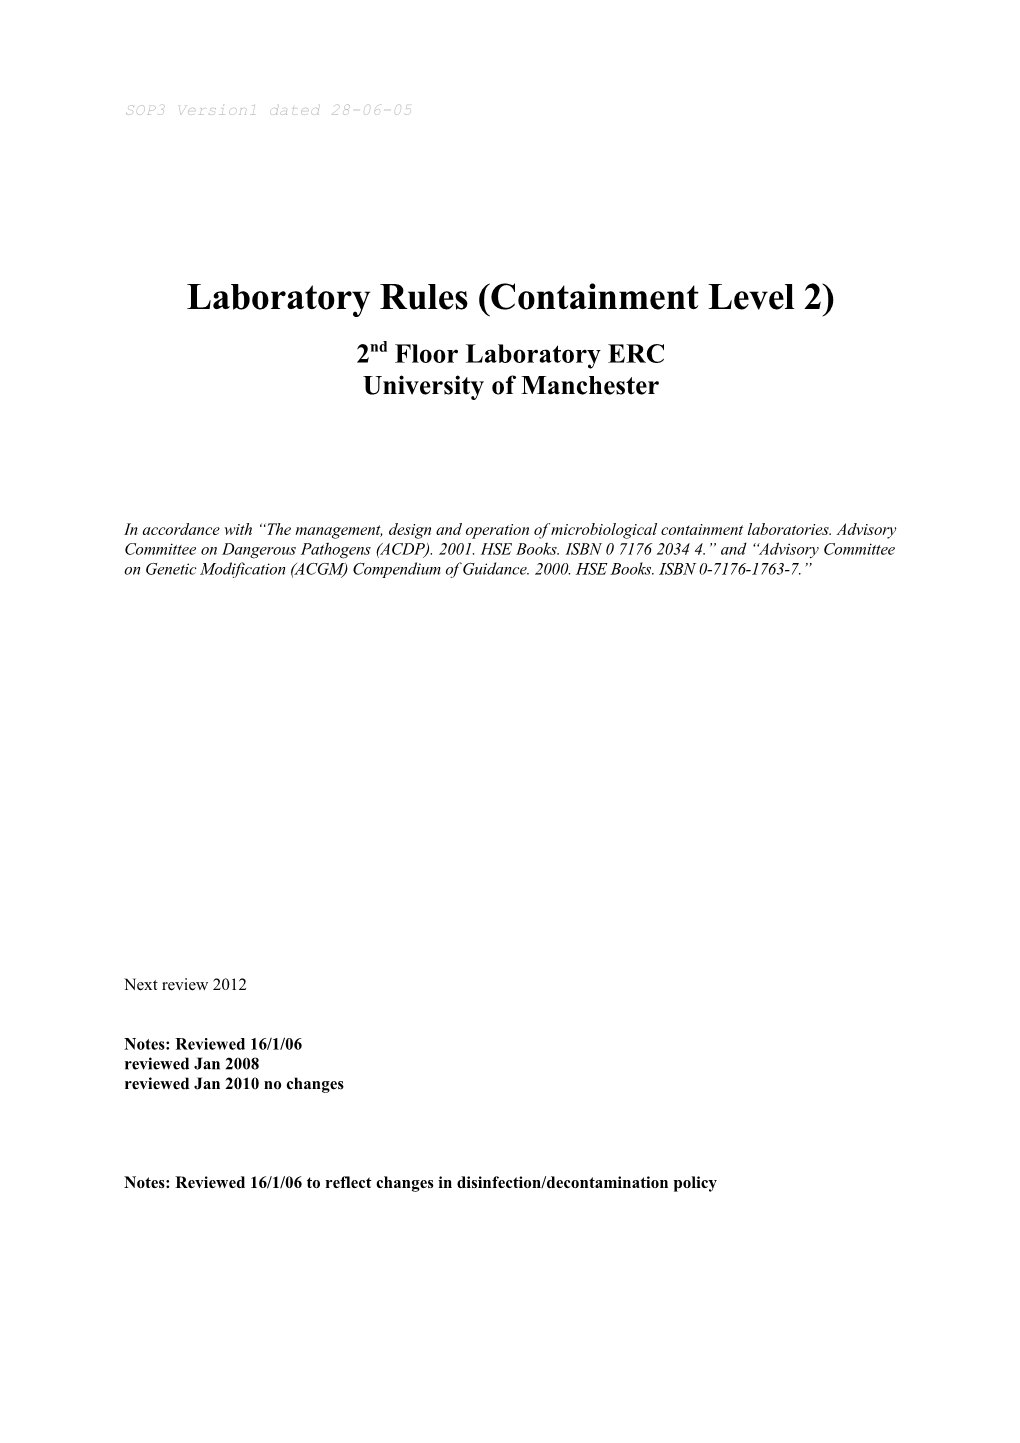 Specimen Laboratory Rules - Example for Containment Level 2 Laboratory